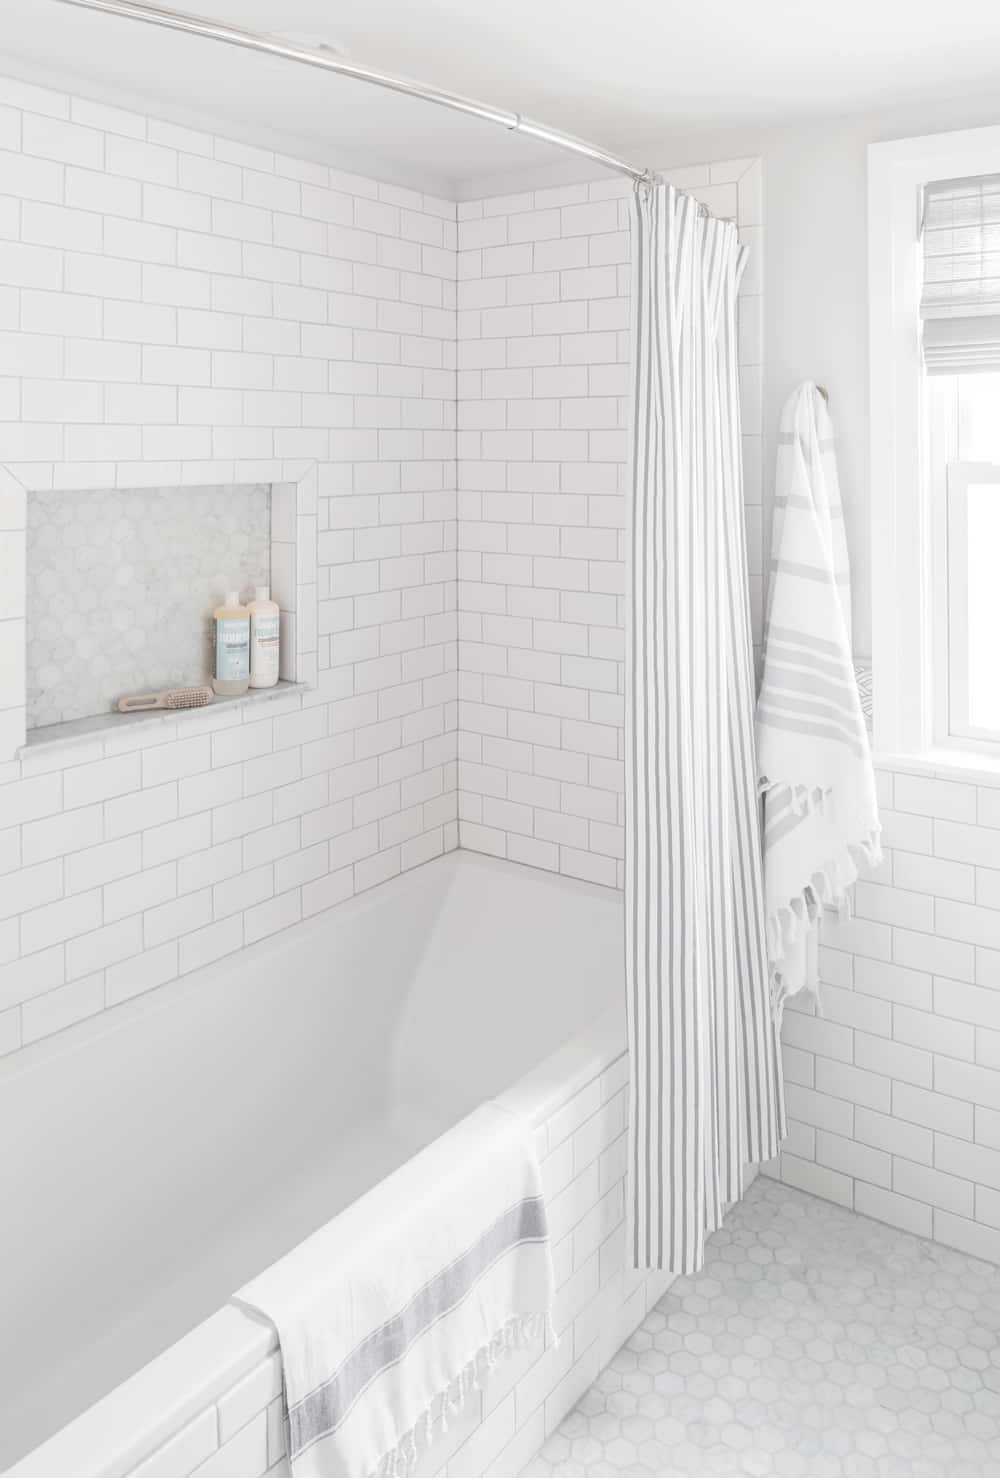 Small Bathroom Renovation White Subway Tile Centered By Design Centered By Design